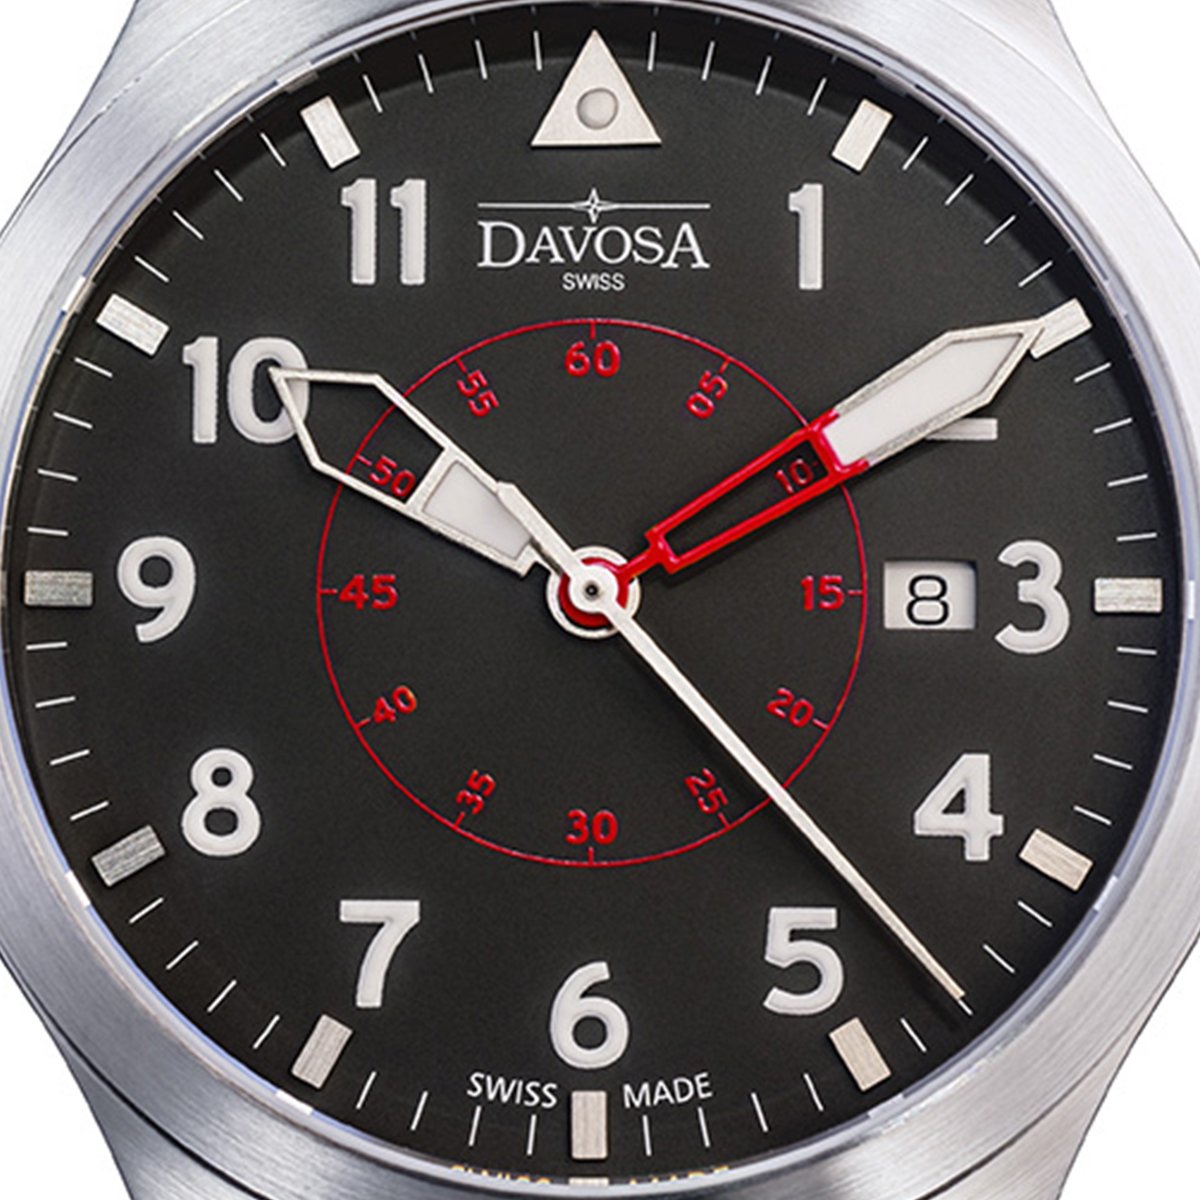 Davosa Neoteric Pilots Watch with Brown Leather Strap - 16156556